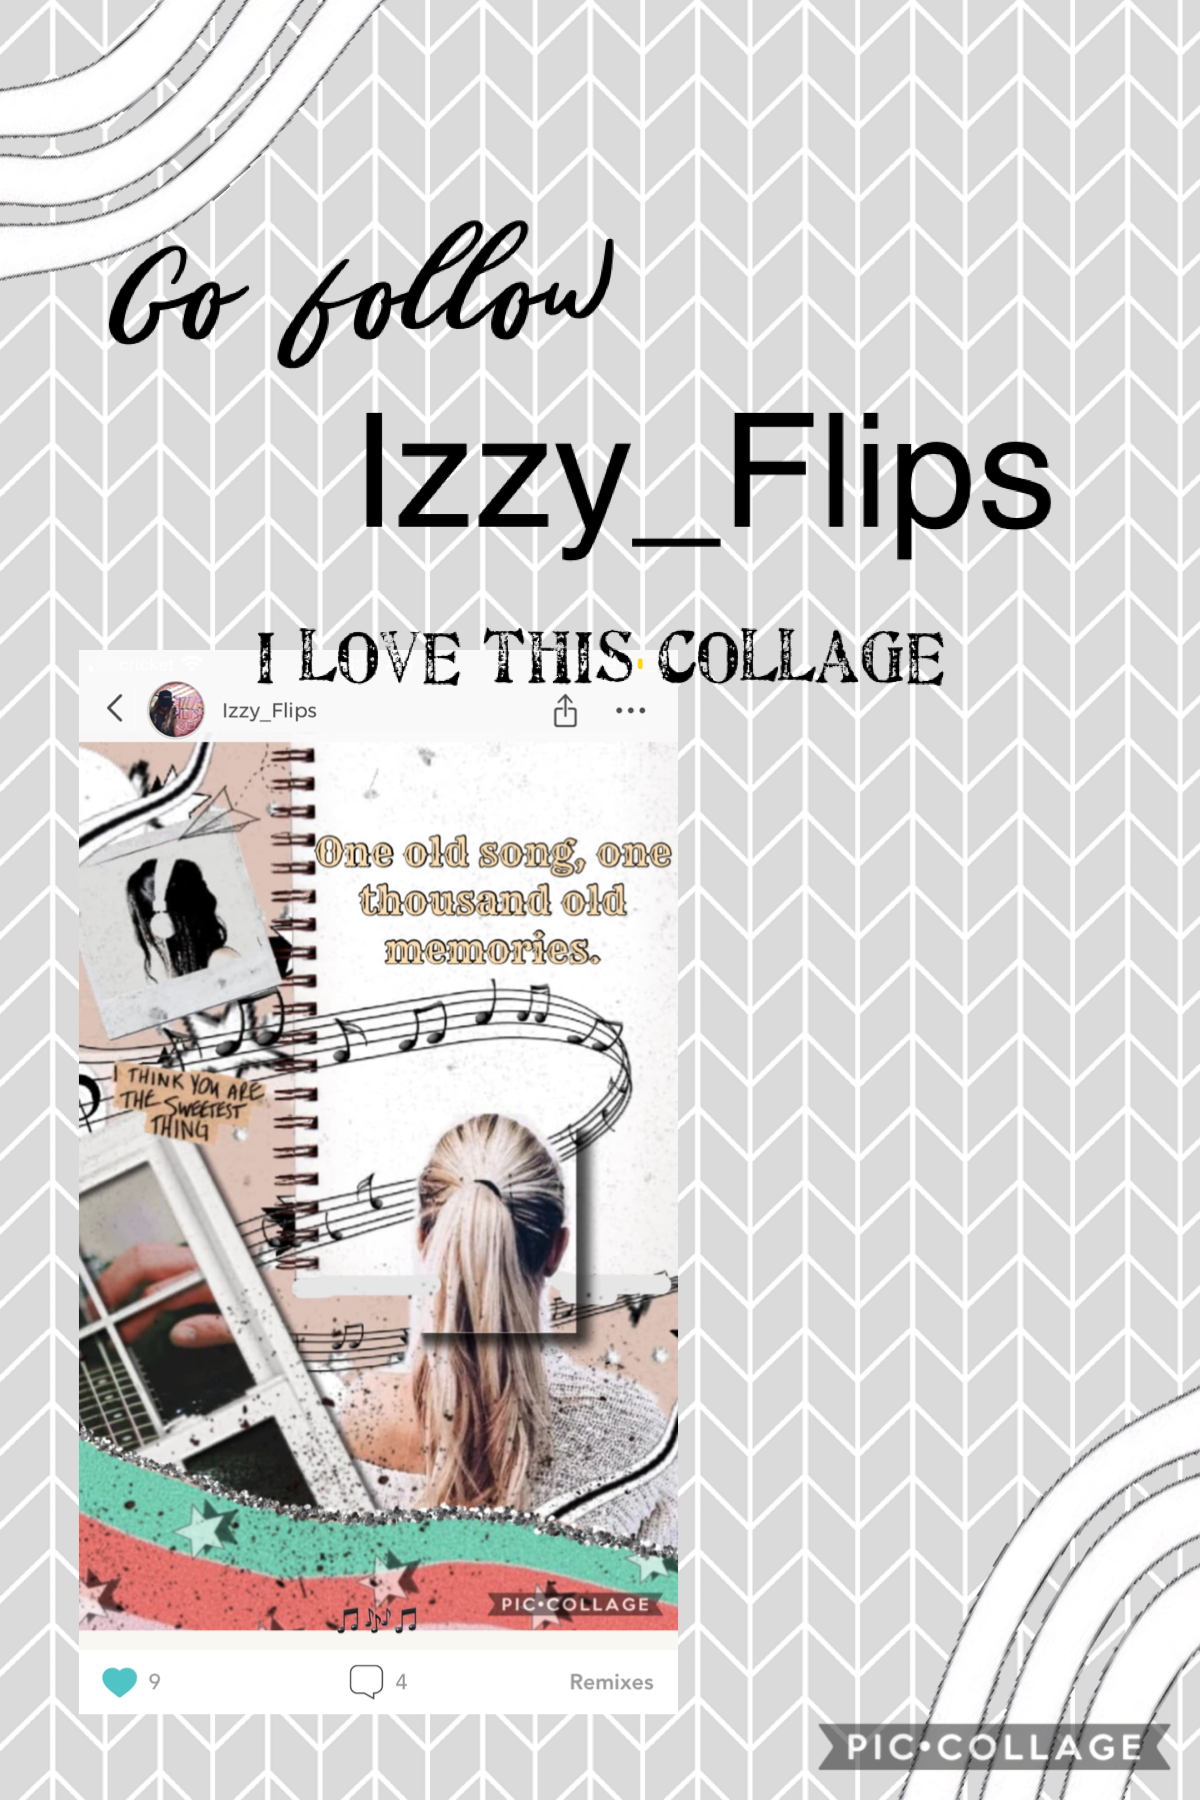 Shoutout to Izzy_Flips, I love her collages, go follow her